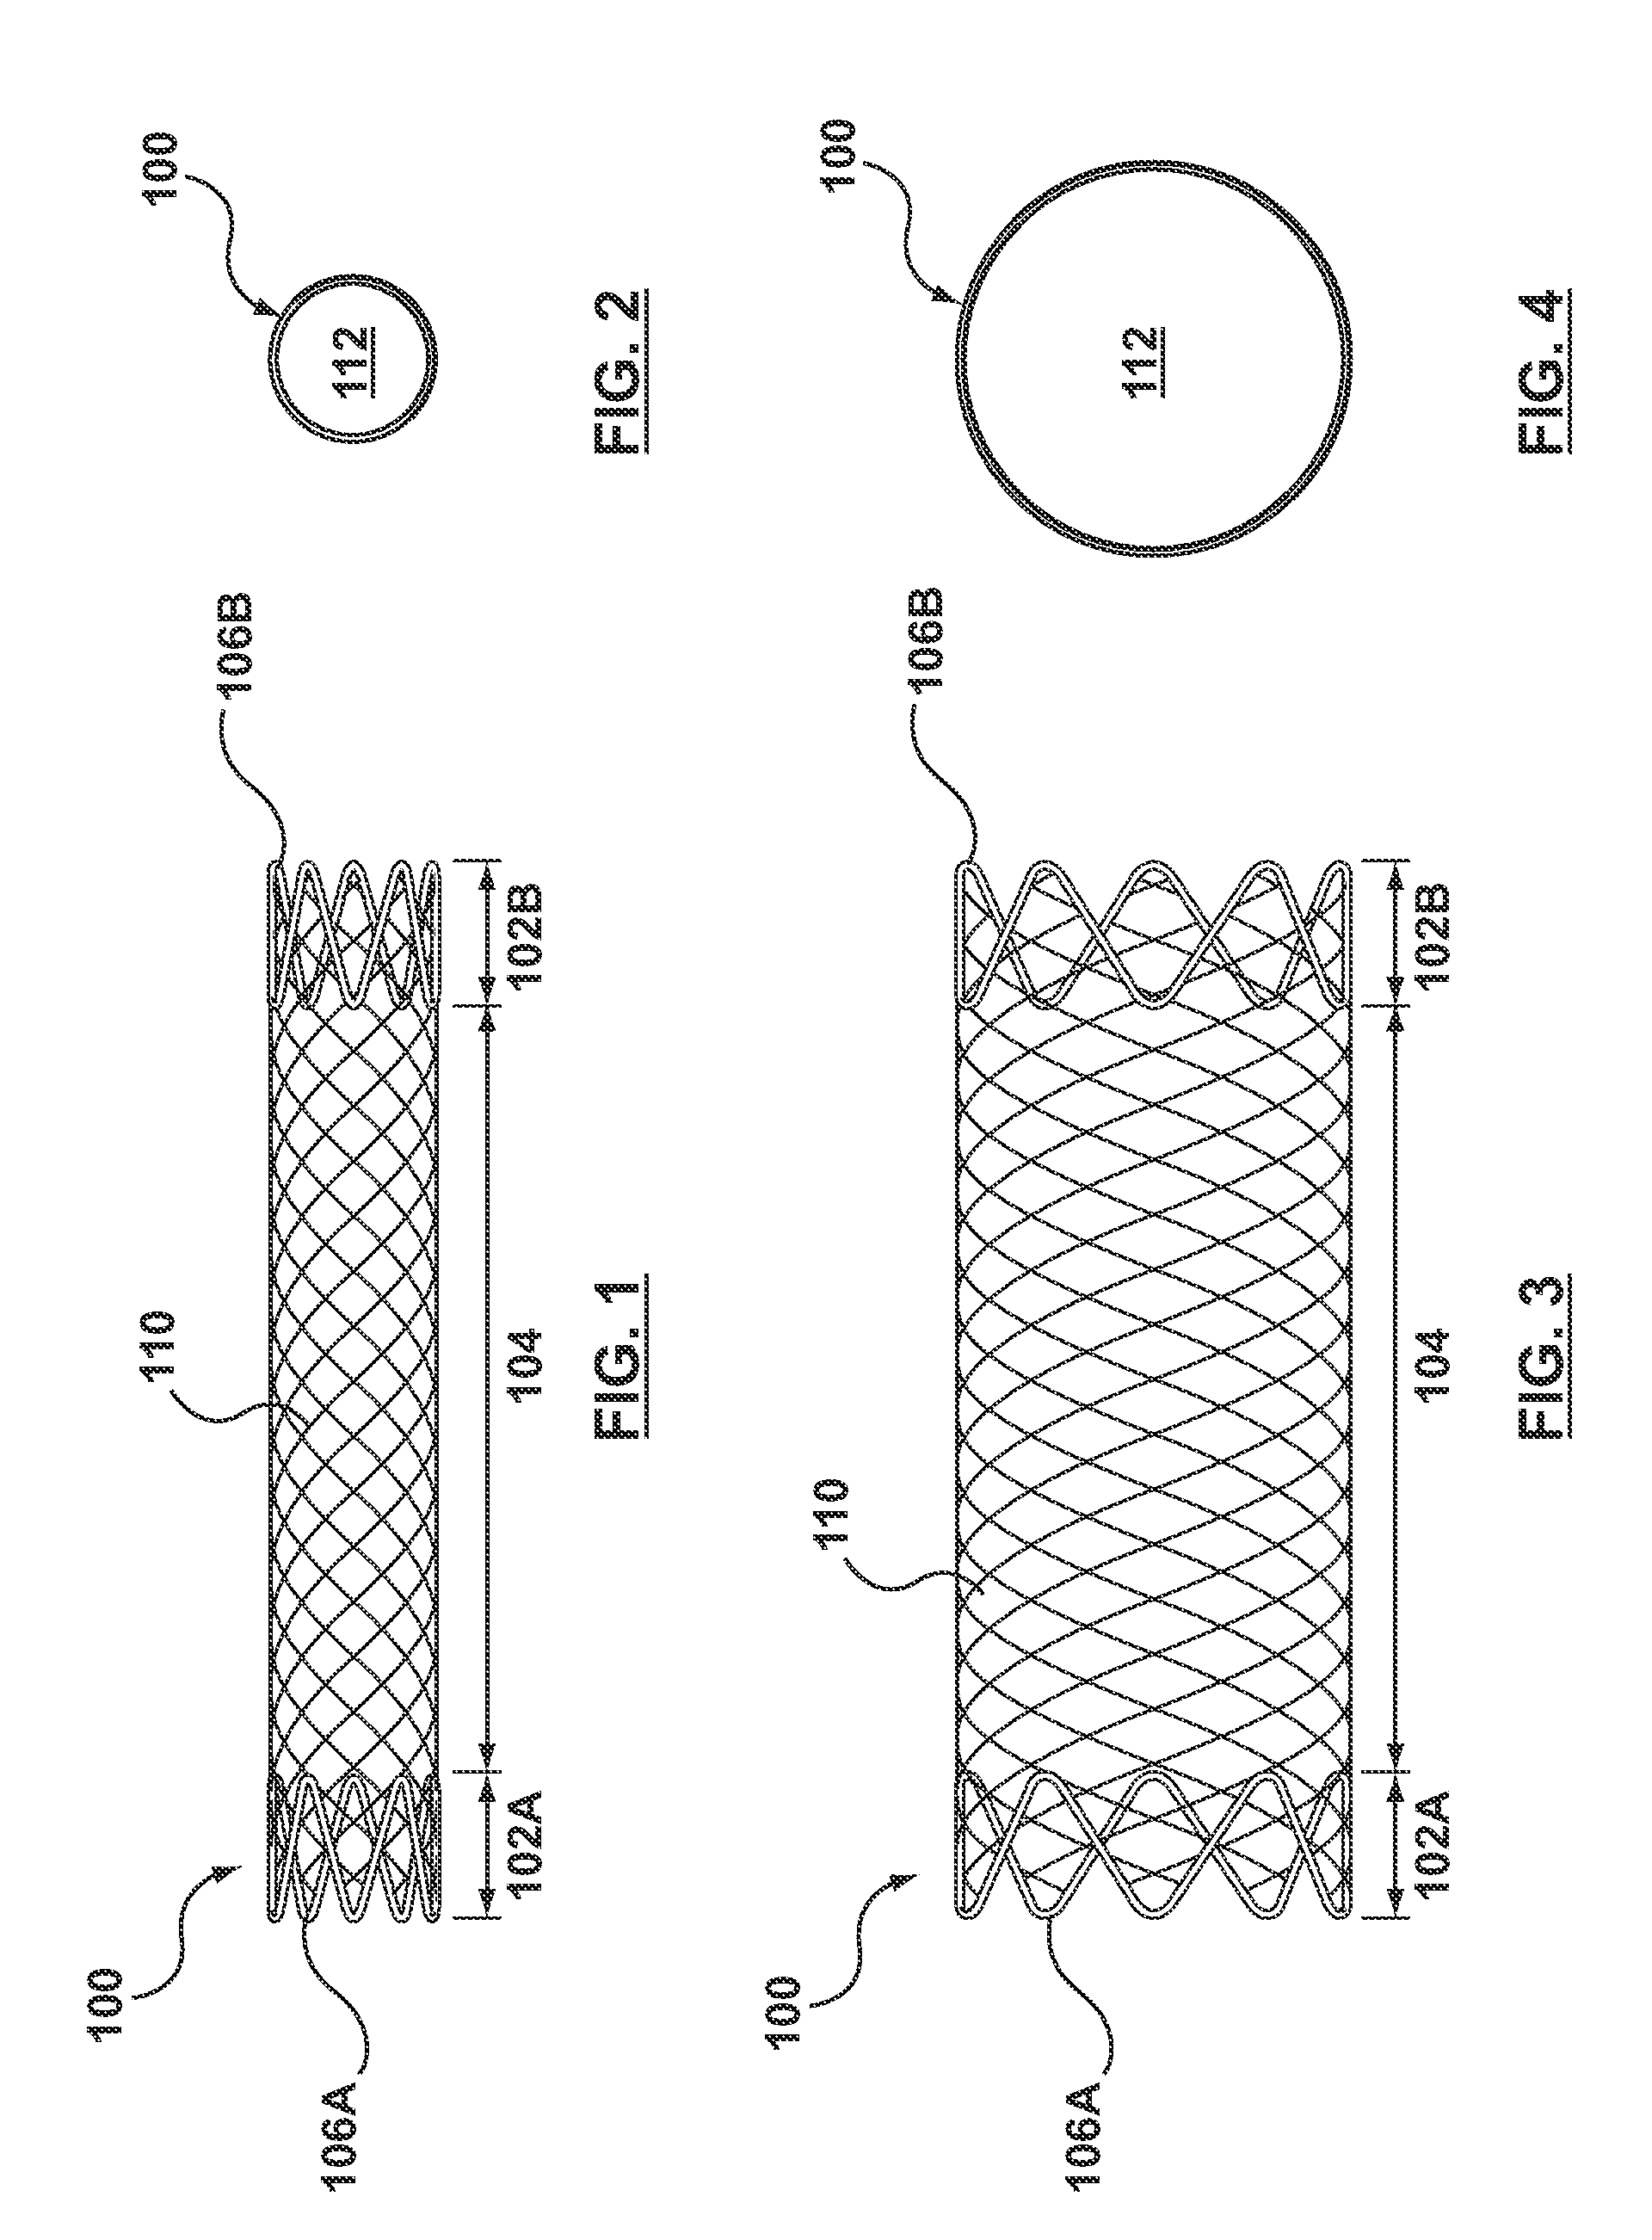 Biodegradable Stent Having Non-Biodegradable End Portions and Mechanisms for Increased Stent Hoop Strength